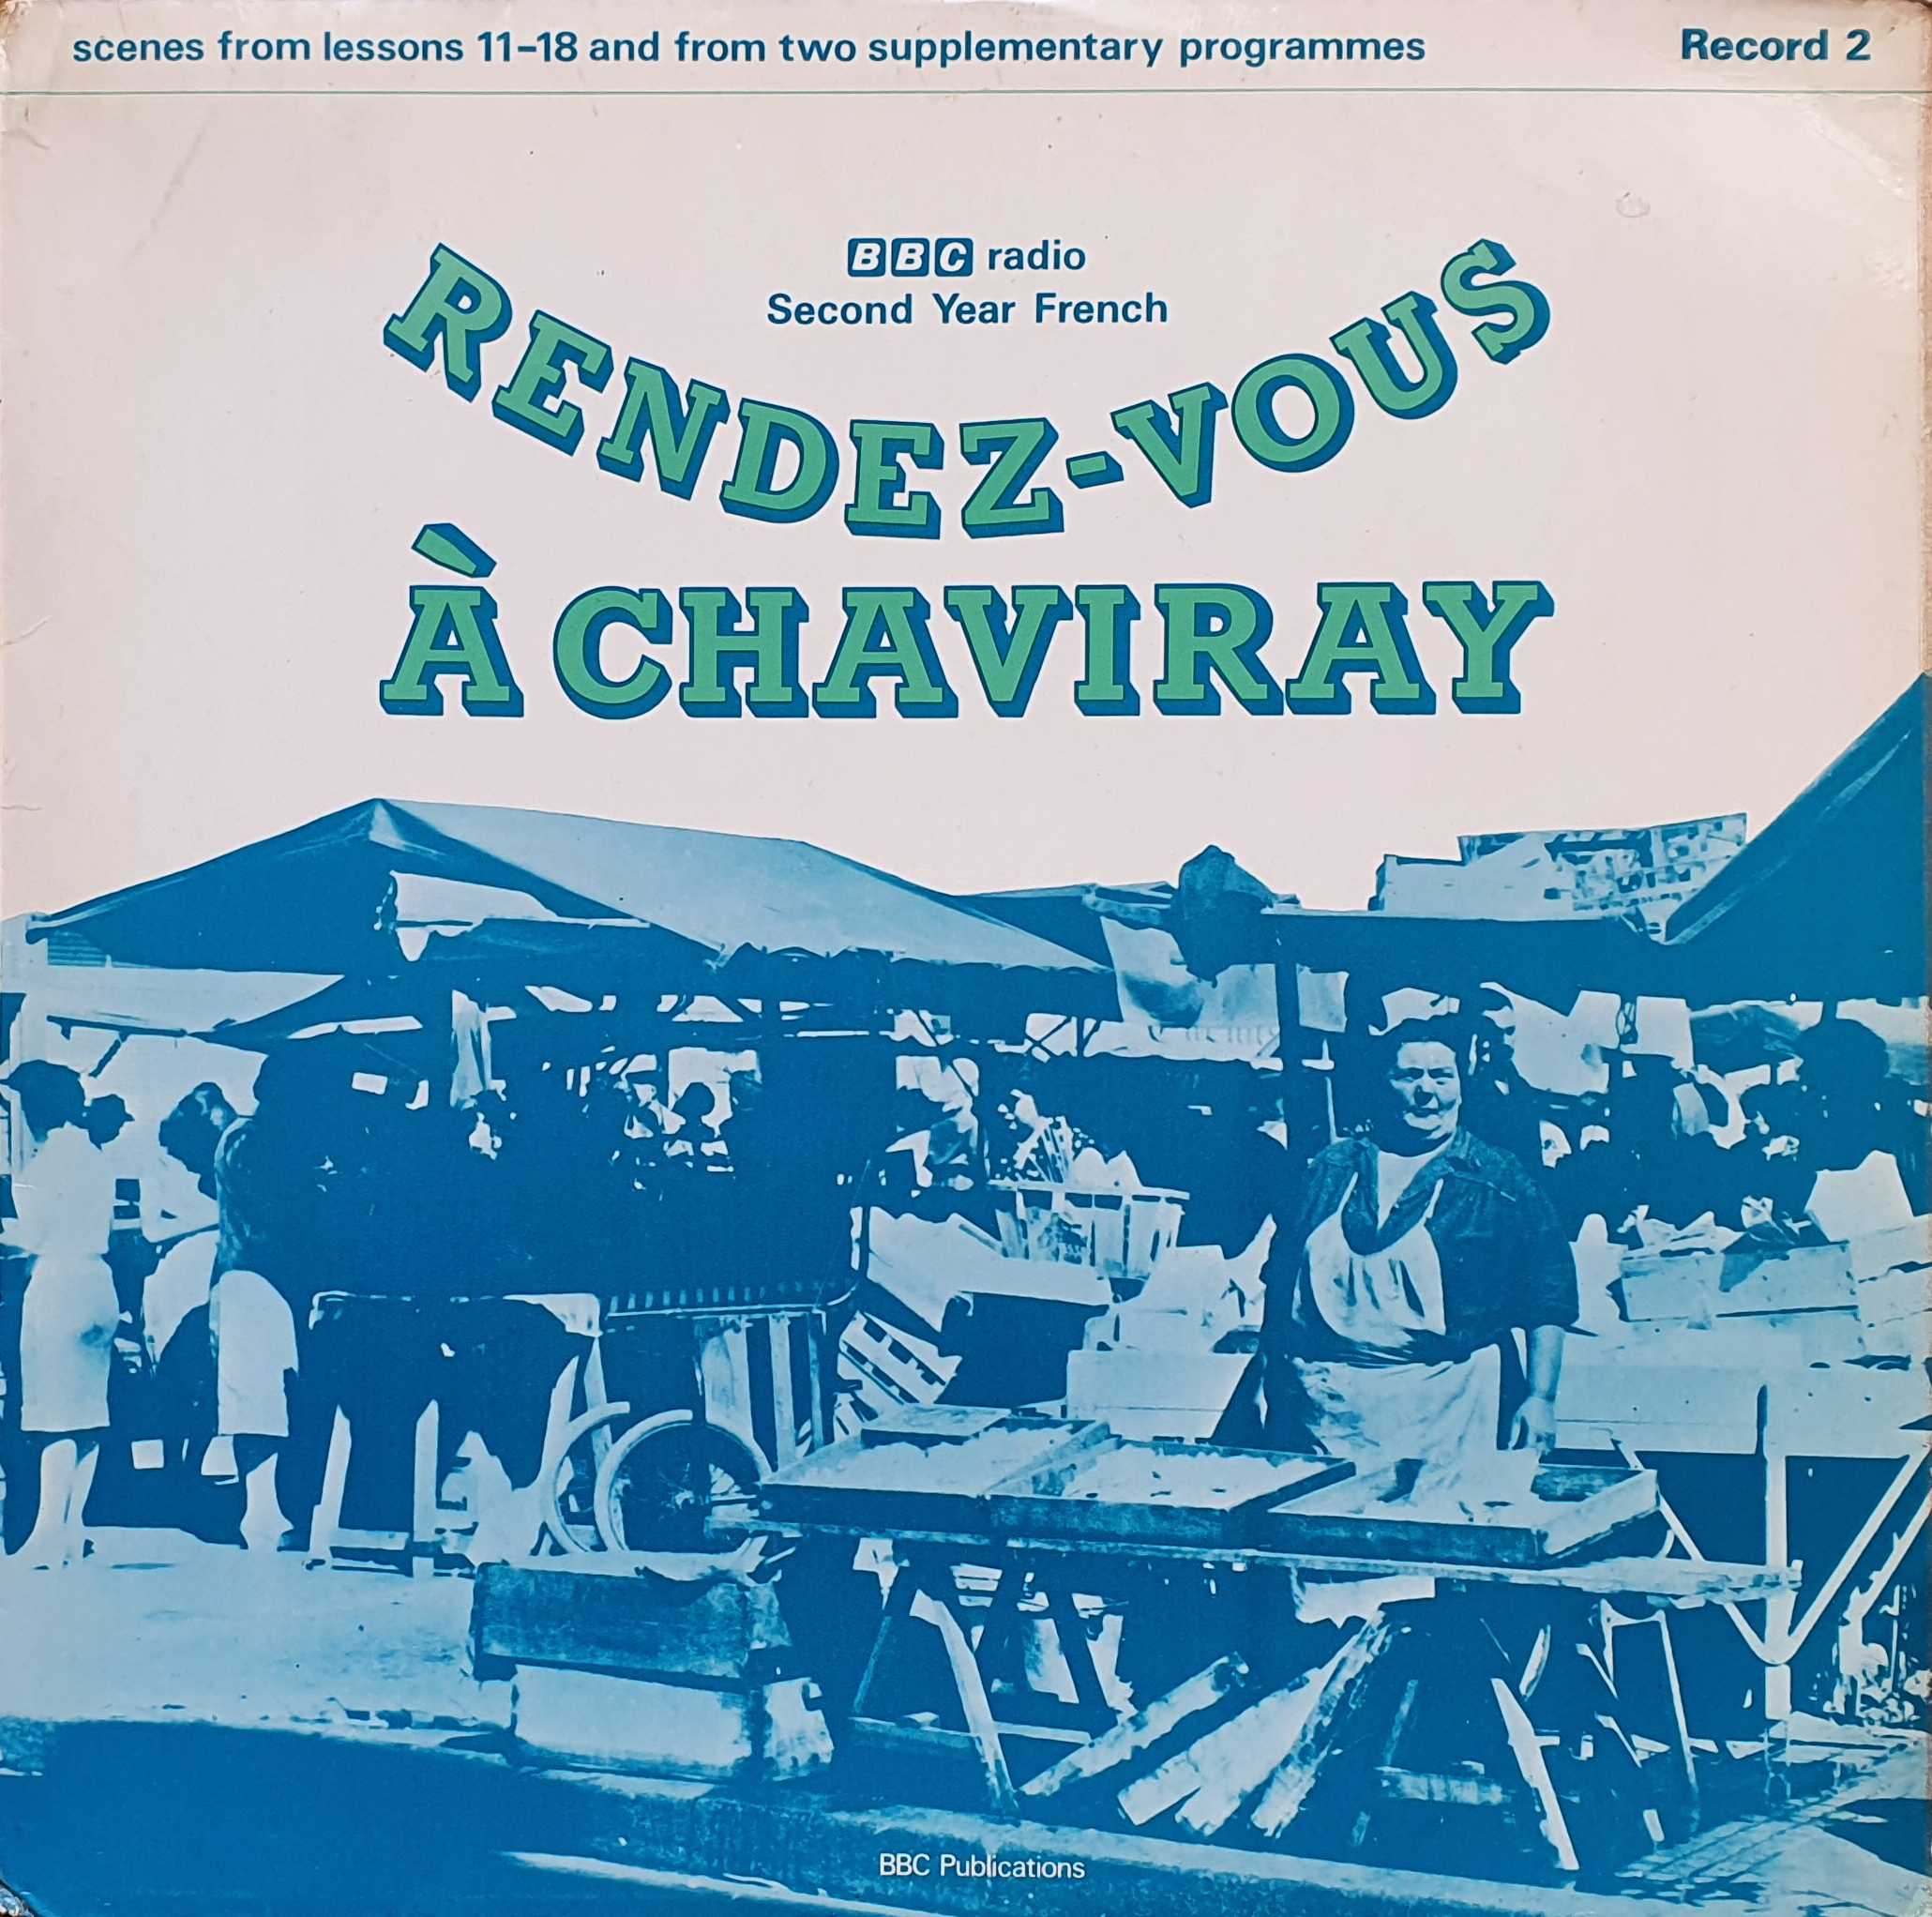 Picture of OP 187/188 Rendez-vous a Chaviray - BBC radio Second Year French - Record 2 - Lessons 19 - 20 by artist John Ross / Madeleine Le Cunff from the BBC albums - Records and Tapes library